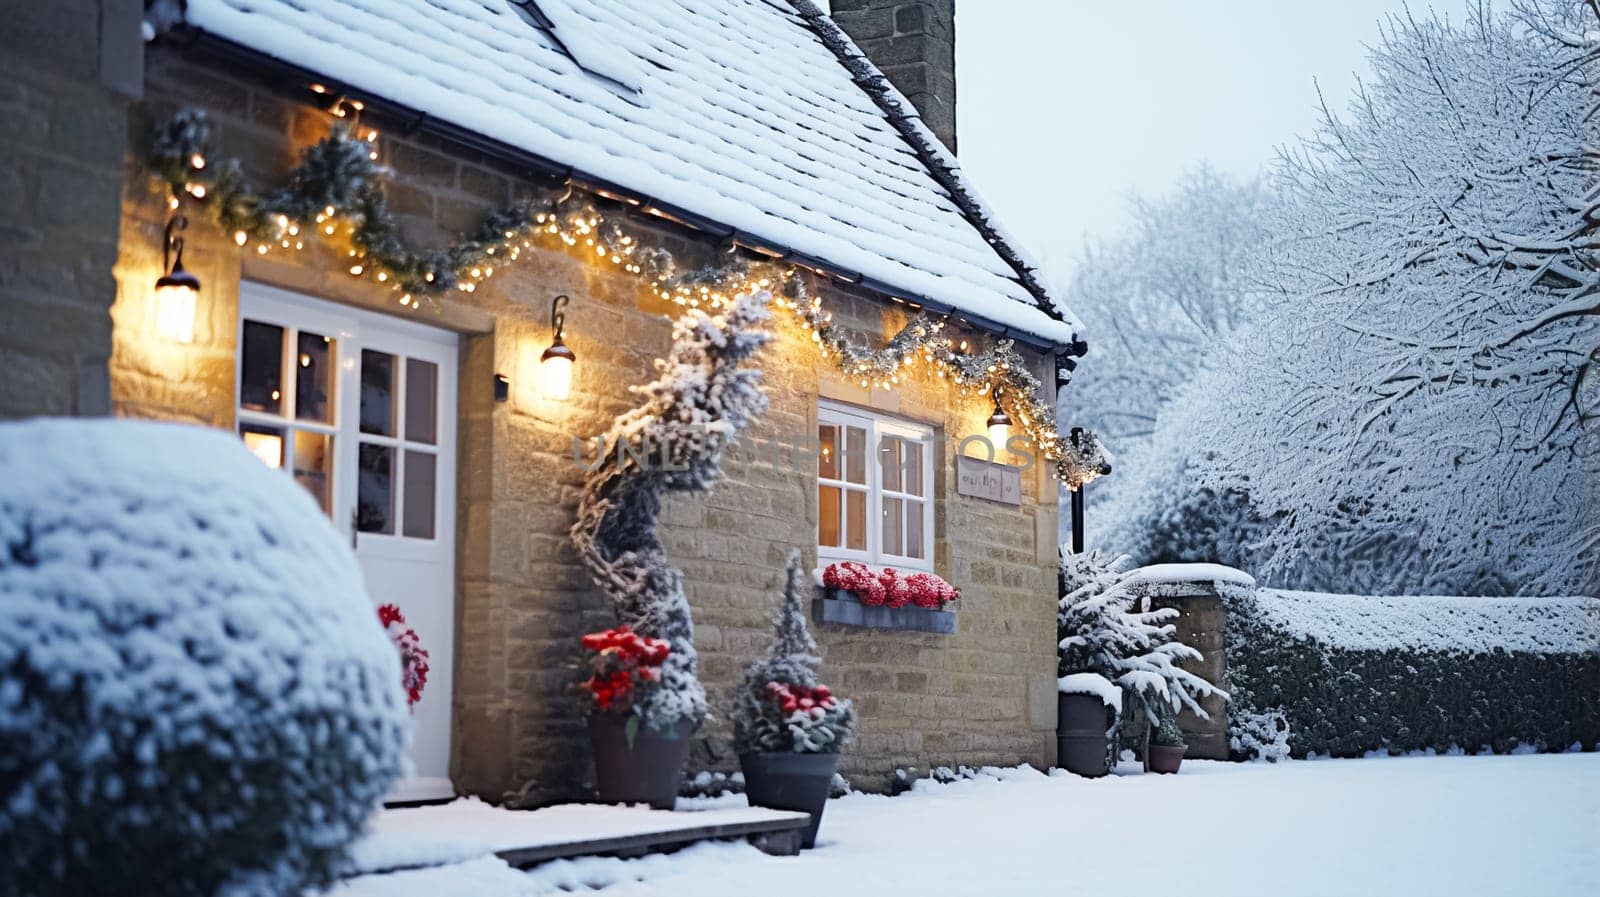 Christmas in the countryside, cottage and garden decorated for holidays on a snowy winter evening with snow and holiday lights, English country styling by Anneleven